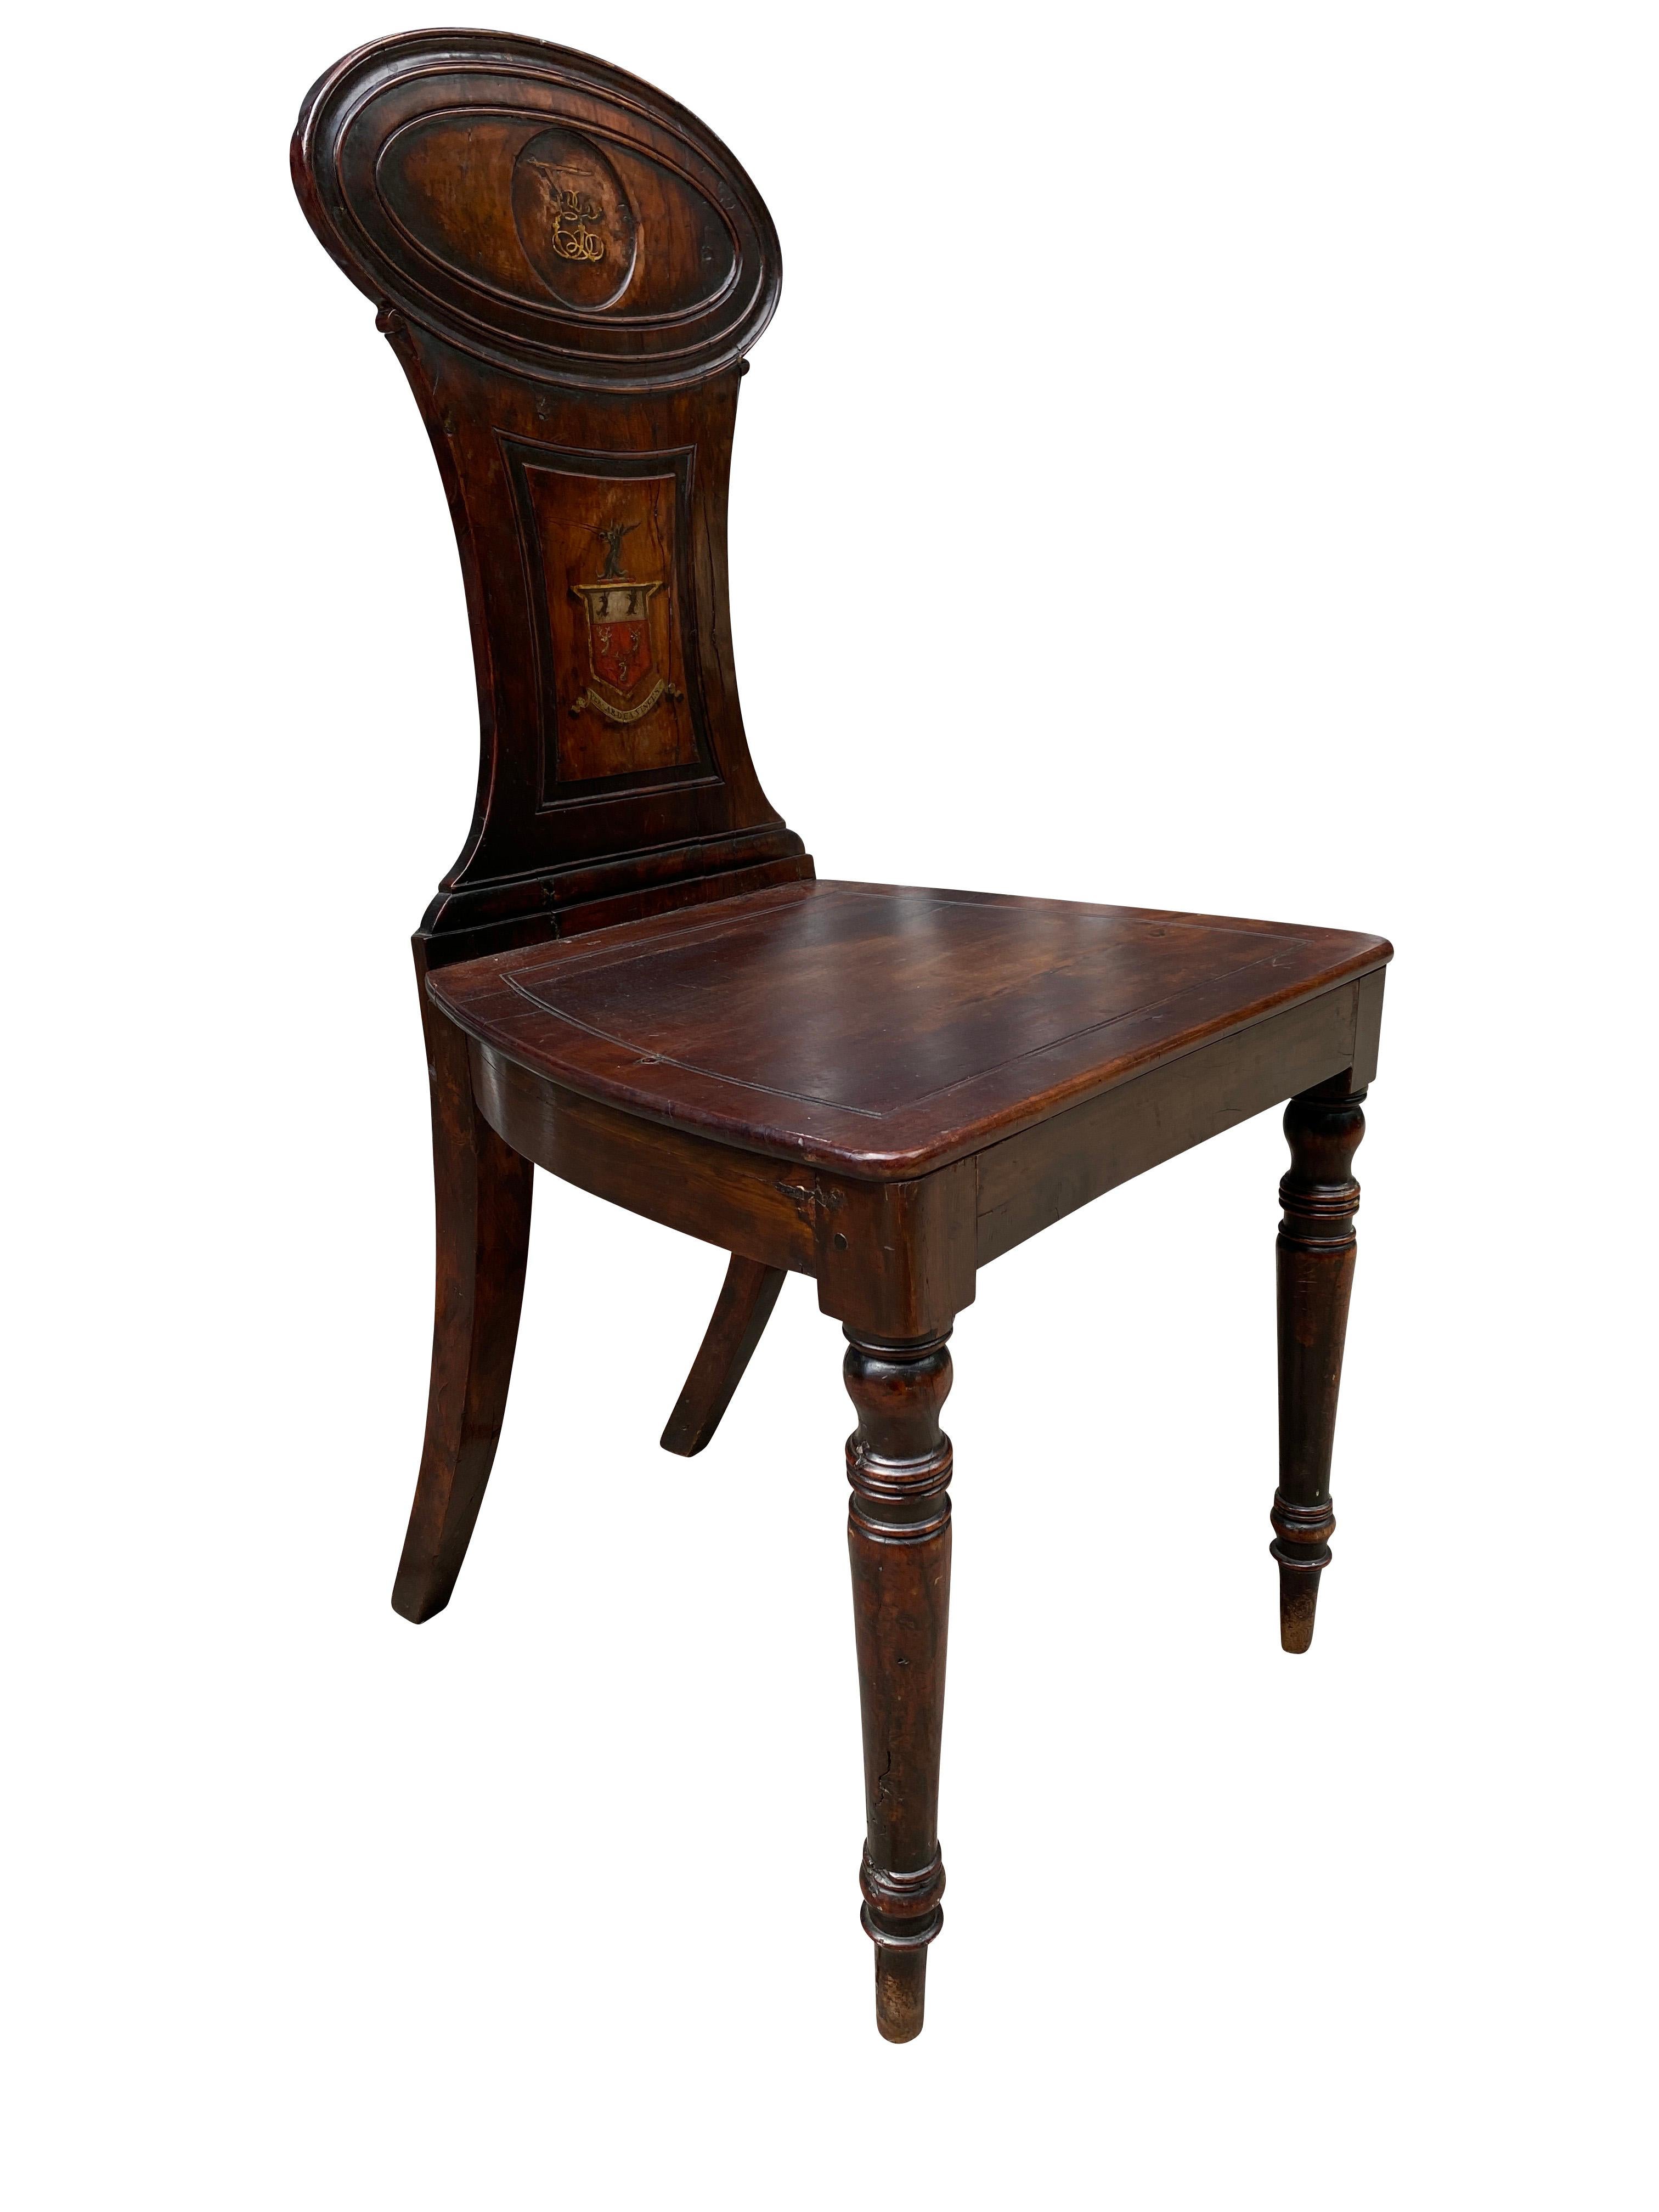 The chair back with oval crest with painted monogram over a tapered splat with coat of arms , wood seat raised on circular tapered legs. From the Estate Of Drue Heinz. Sutton Place. NYC.